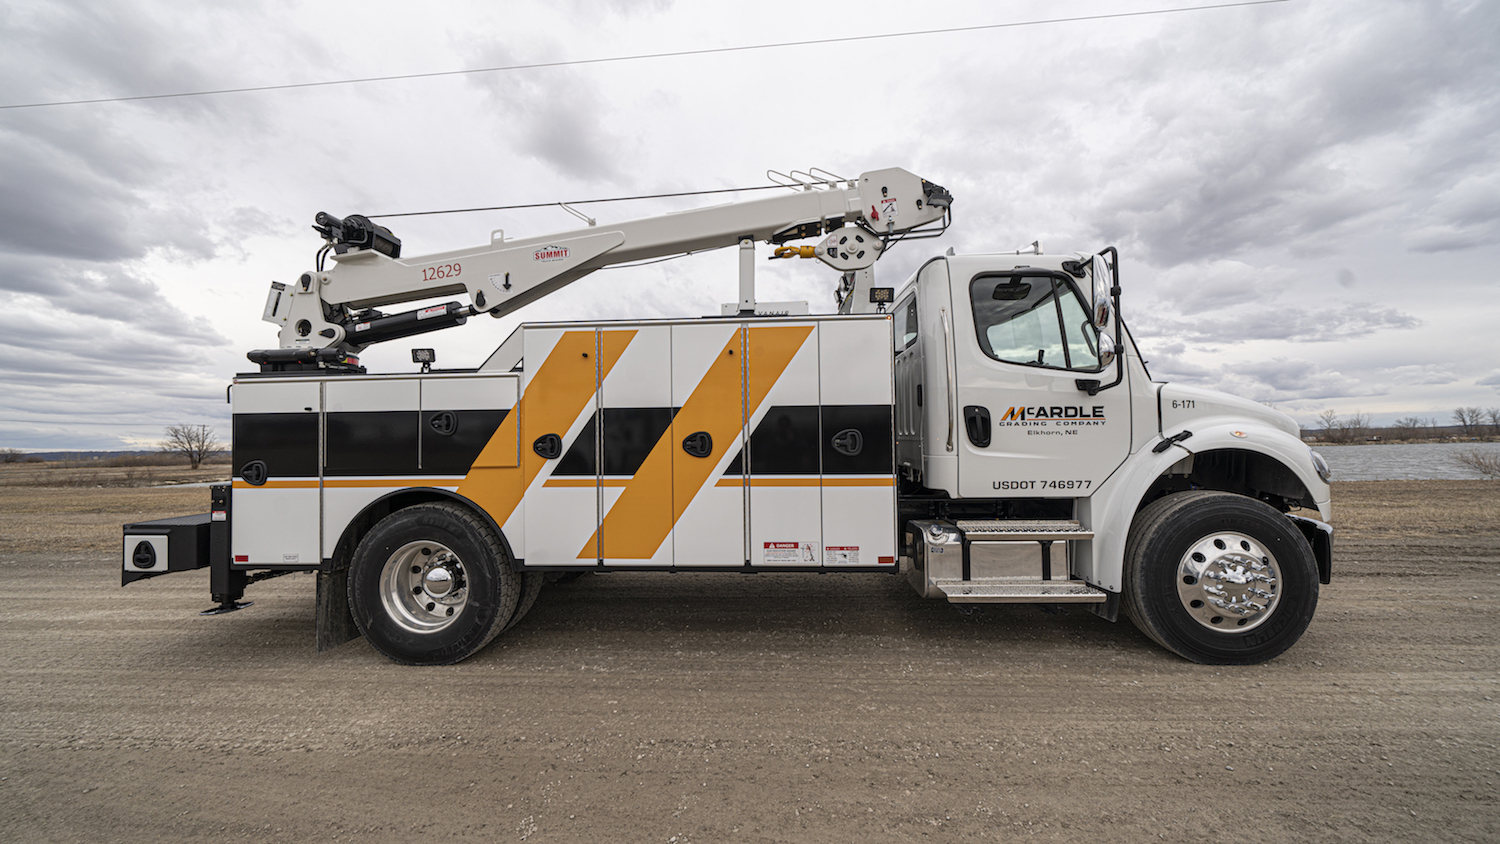 10 Series truck bodies are great to oil and gas industry service trucks.